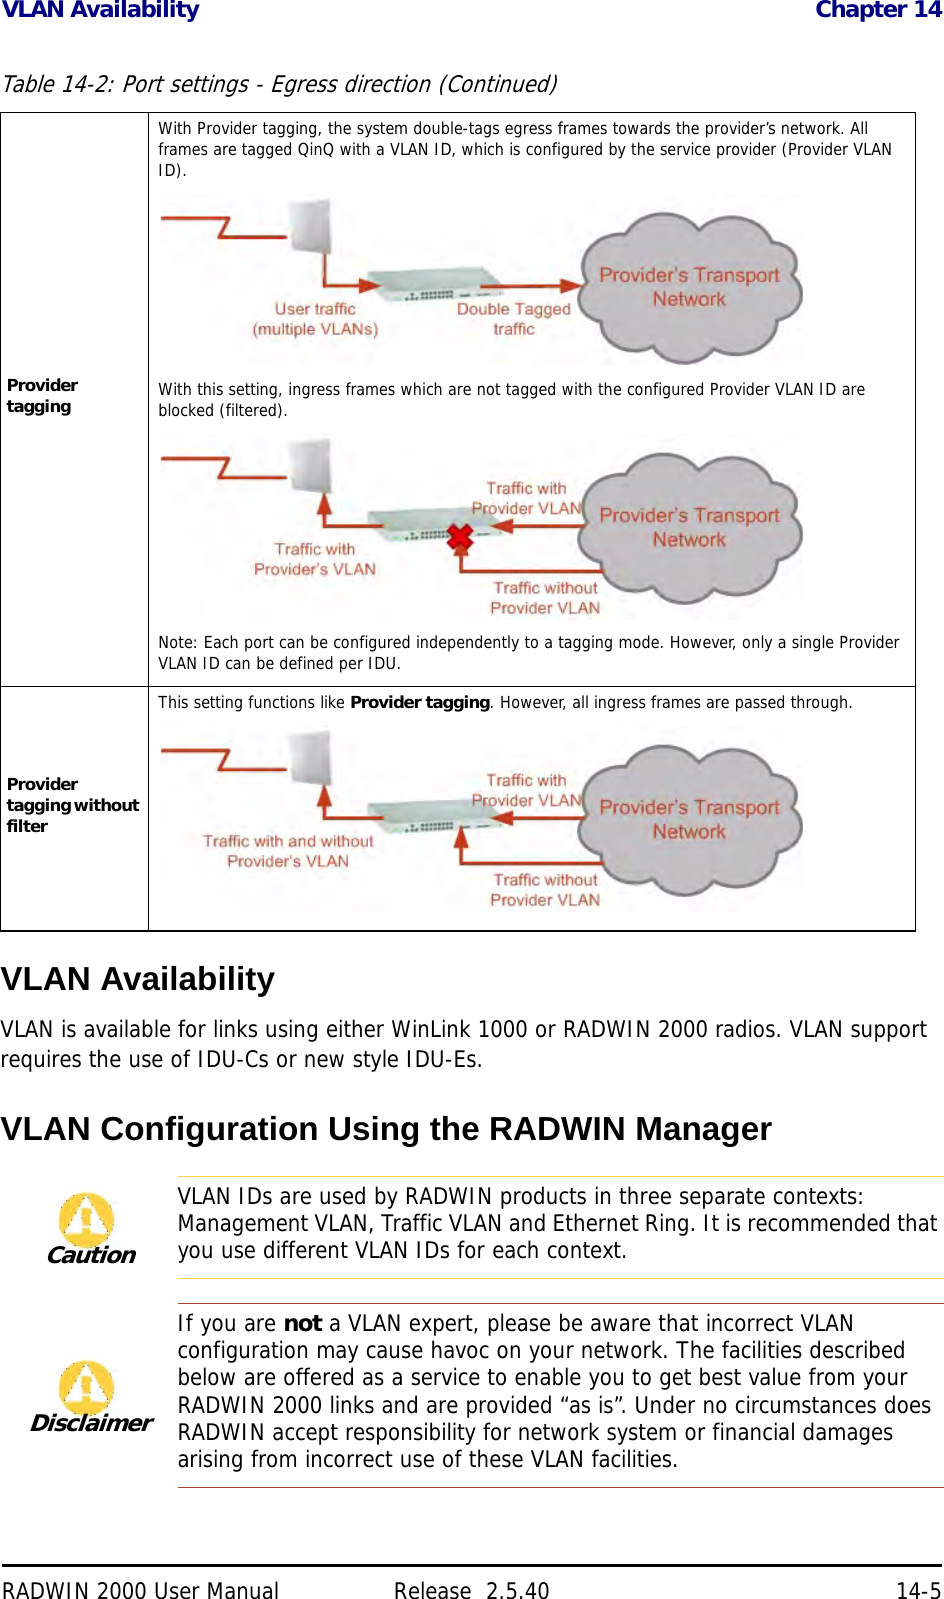 VLAN Availability Chapter 14RADWIN 2000 User Manual Release  2.5.40 14-5VLAN AvailabilityVLAN is available for links using either WinLink 1000 or RADWIN 2000 radios. VLAN support requires the use of IDU-Cs or new style IDU-Es.VLAN Configuration Using the RADWIN ManagerProvider taggingWith Provider tagging, the system double-tags egress frames towards the provider’s network. All frames are tagged QinQ with a VLAN ID, which is configured by the service provider (Provider VLAN ID).With this setting, ingress frames which are not tagged with the configured Provider VLAN ID are blocked (filtered).Note: Each port can be configured independently to a tagging mode. However, only a single Provider VLAN ID can be defined per IDU.Provider tagging without filterThis setting functions like Provider tagging. However, all ingress frames are passed through.CautionVLAN IDs are used by RADWIN products in three separate contexts: Management VLAN, Traffic VLAN and Ethernet Ring. It is recommended that you use different VLAN IDs for each context.DisclaimerIf you are not a VLAN expert, please be aware that incorrect VLAN configuration may cause havoc on your network. The facilities described below are offered as a service to enable you to get best value from your RADWIN 2000 links and are provided “as is”. Under no circumstances does RADWIN accept responsibility for network system or financial damages arising from incorrect use of these VLAN facilities.Table 14-2: Port settings - Egress direction (Continued)